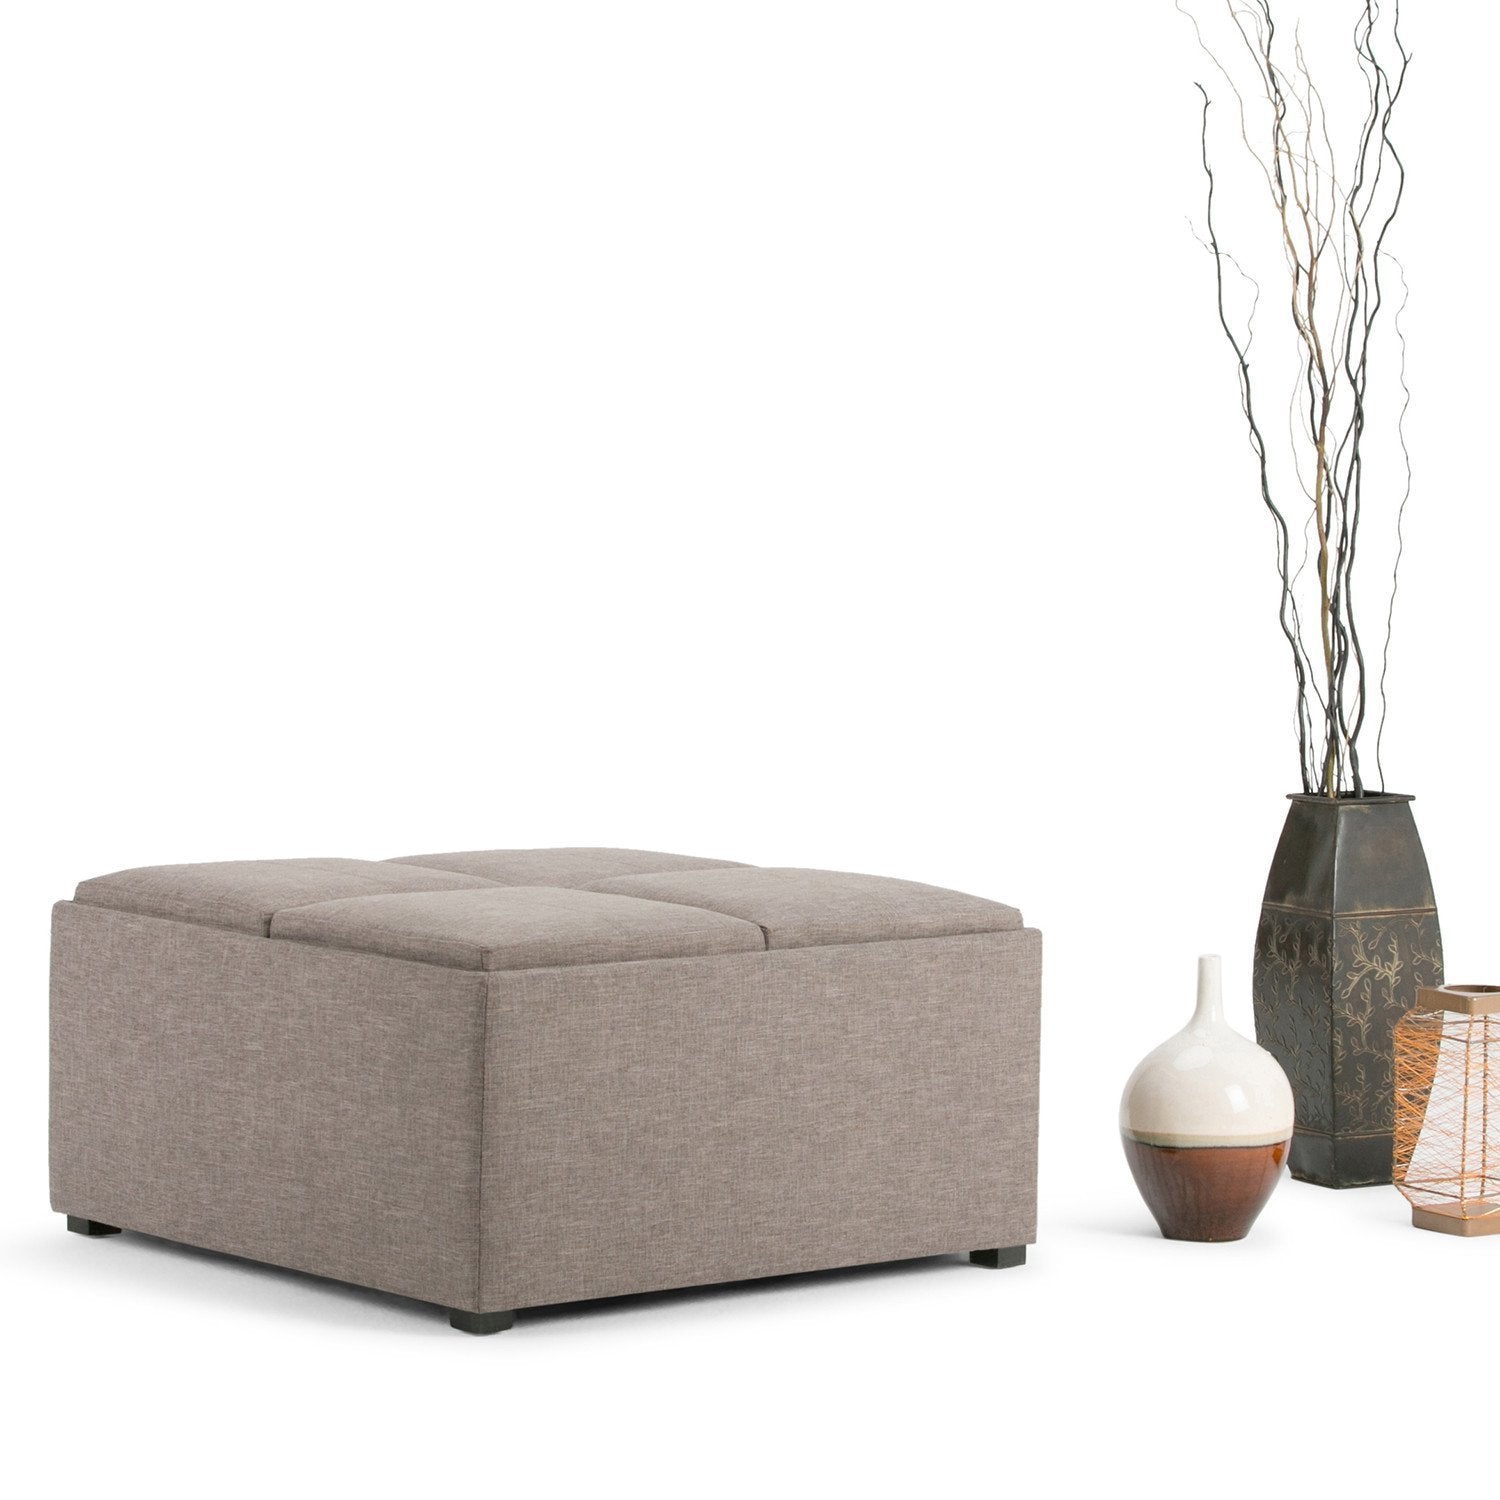 Fawn Brown Linen Style Fabric | Avalon Vegan Leather Square Coffee Table Storage Ottoman